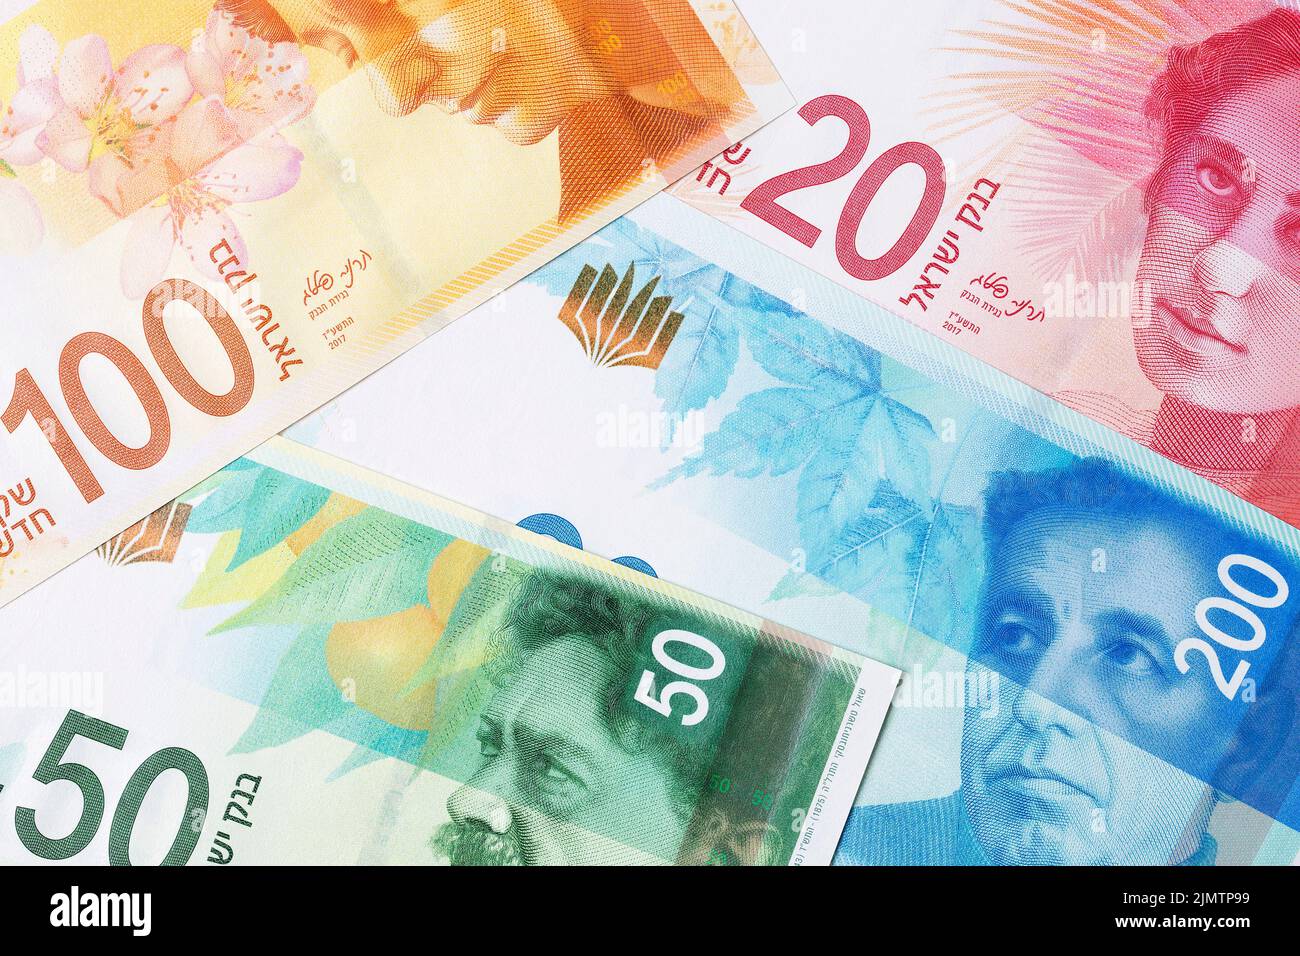 Money from Izrael, a background Stock Photo